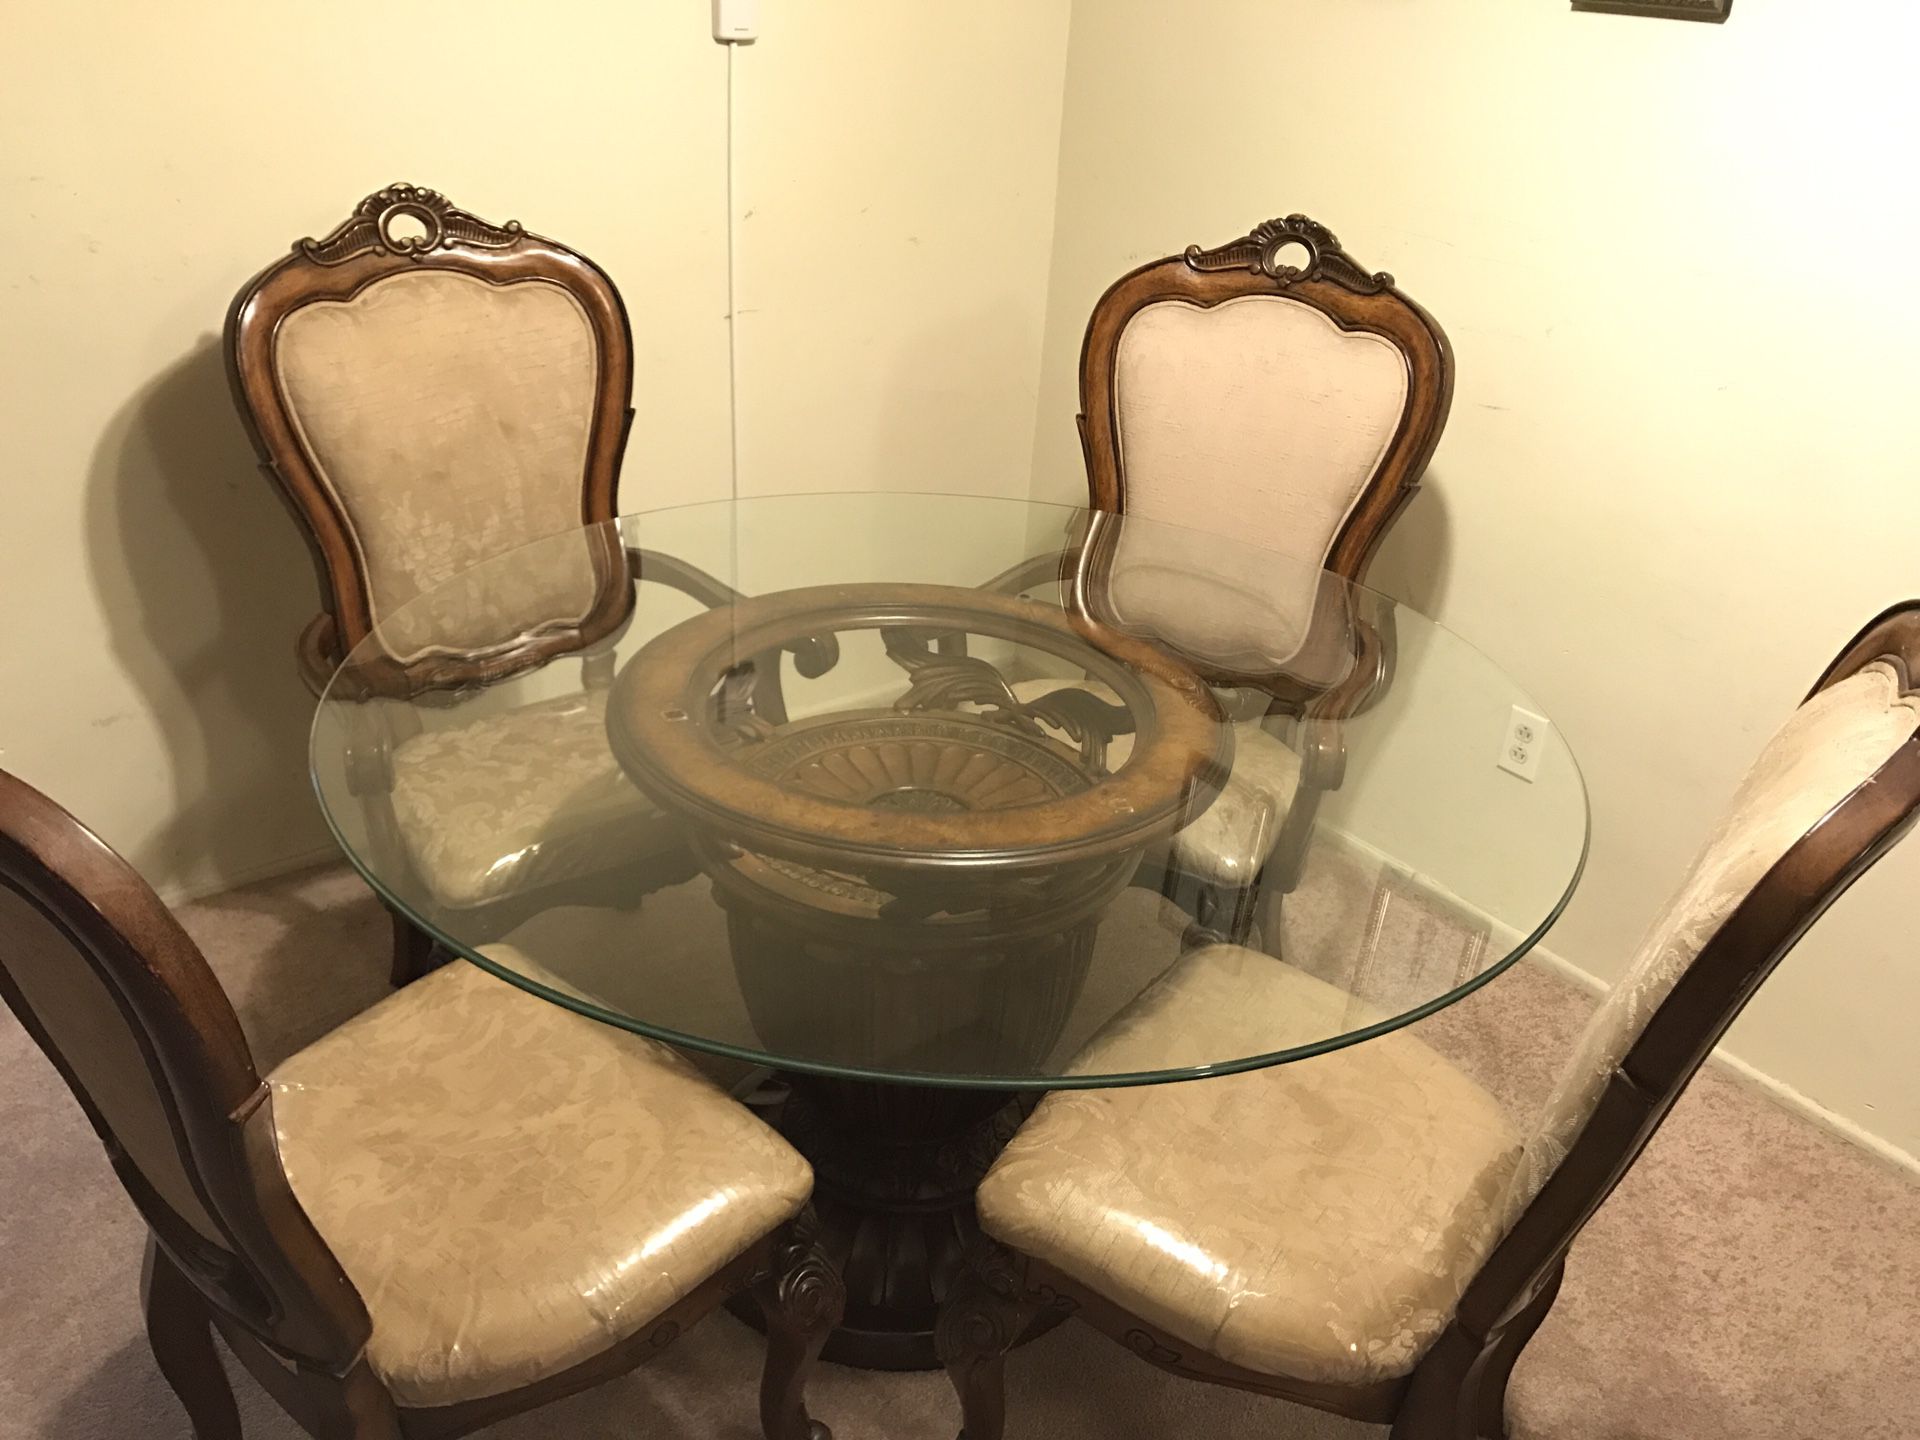 Solid wood dining table base with glass top